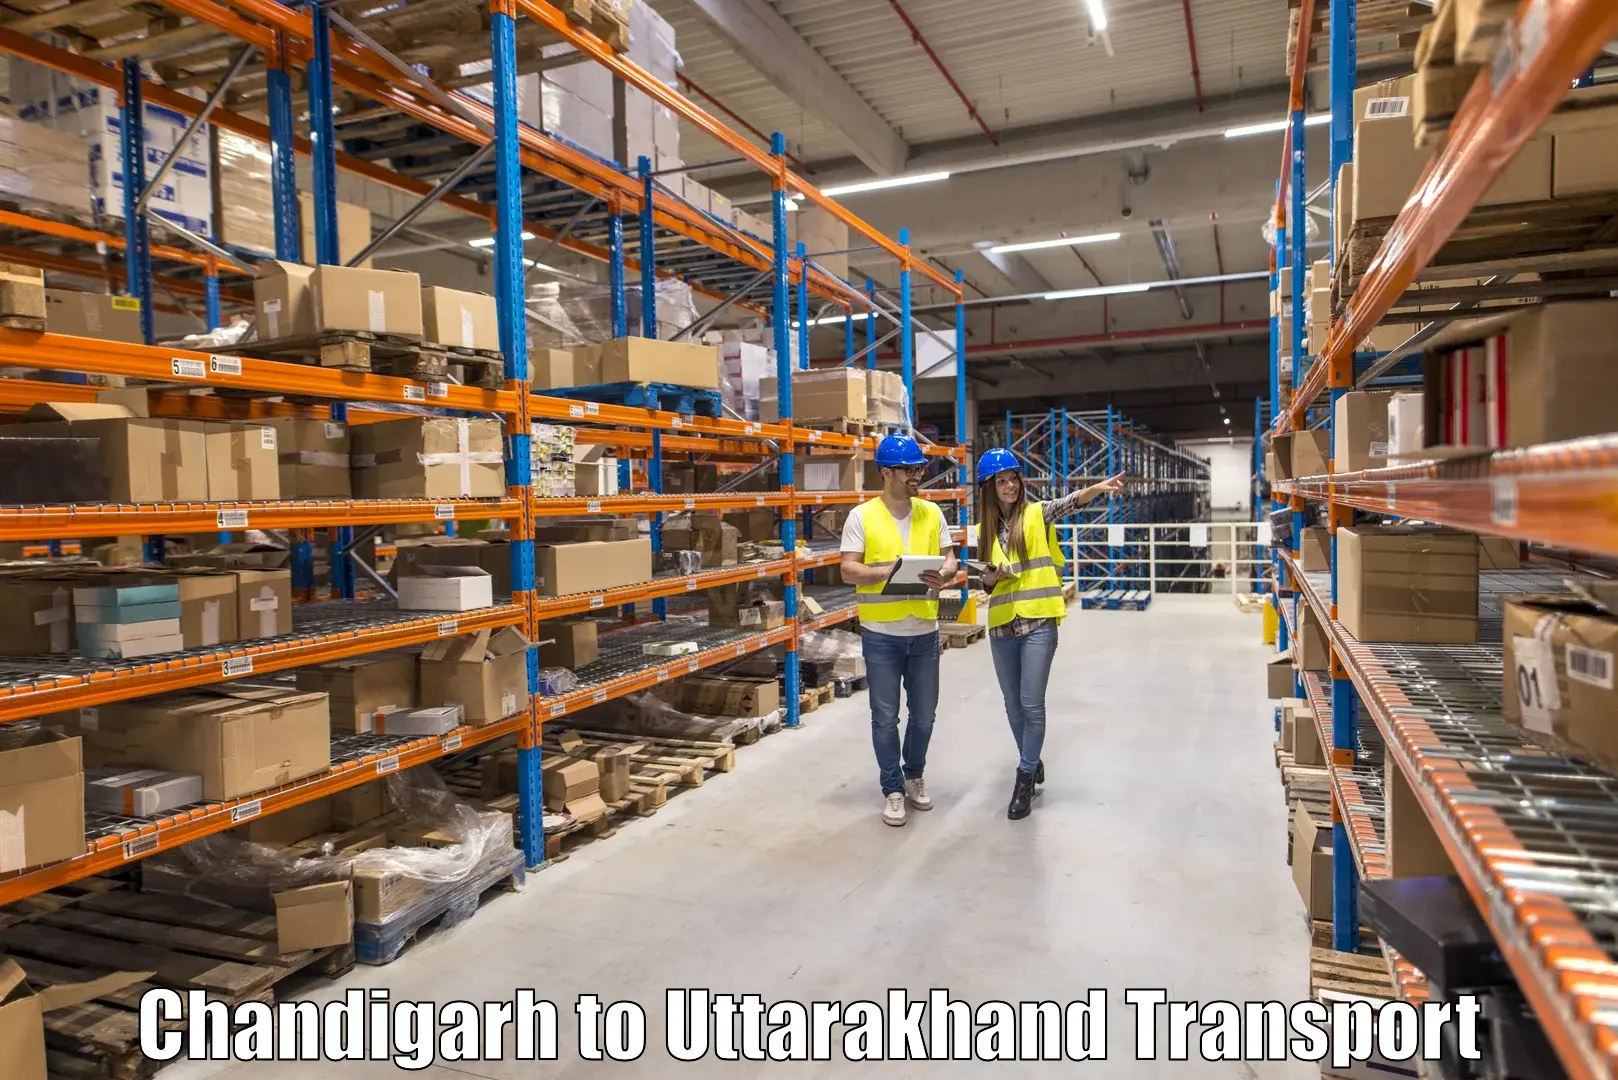 Part load transport service in India Chandigarh to Rishikesh